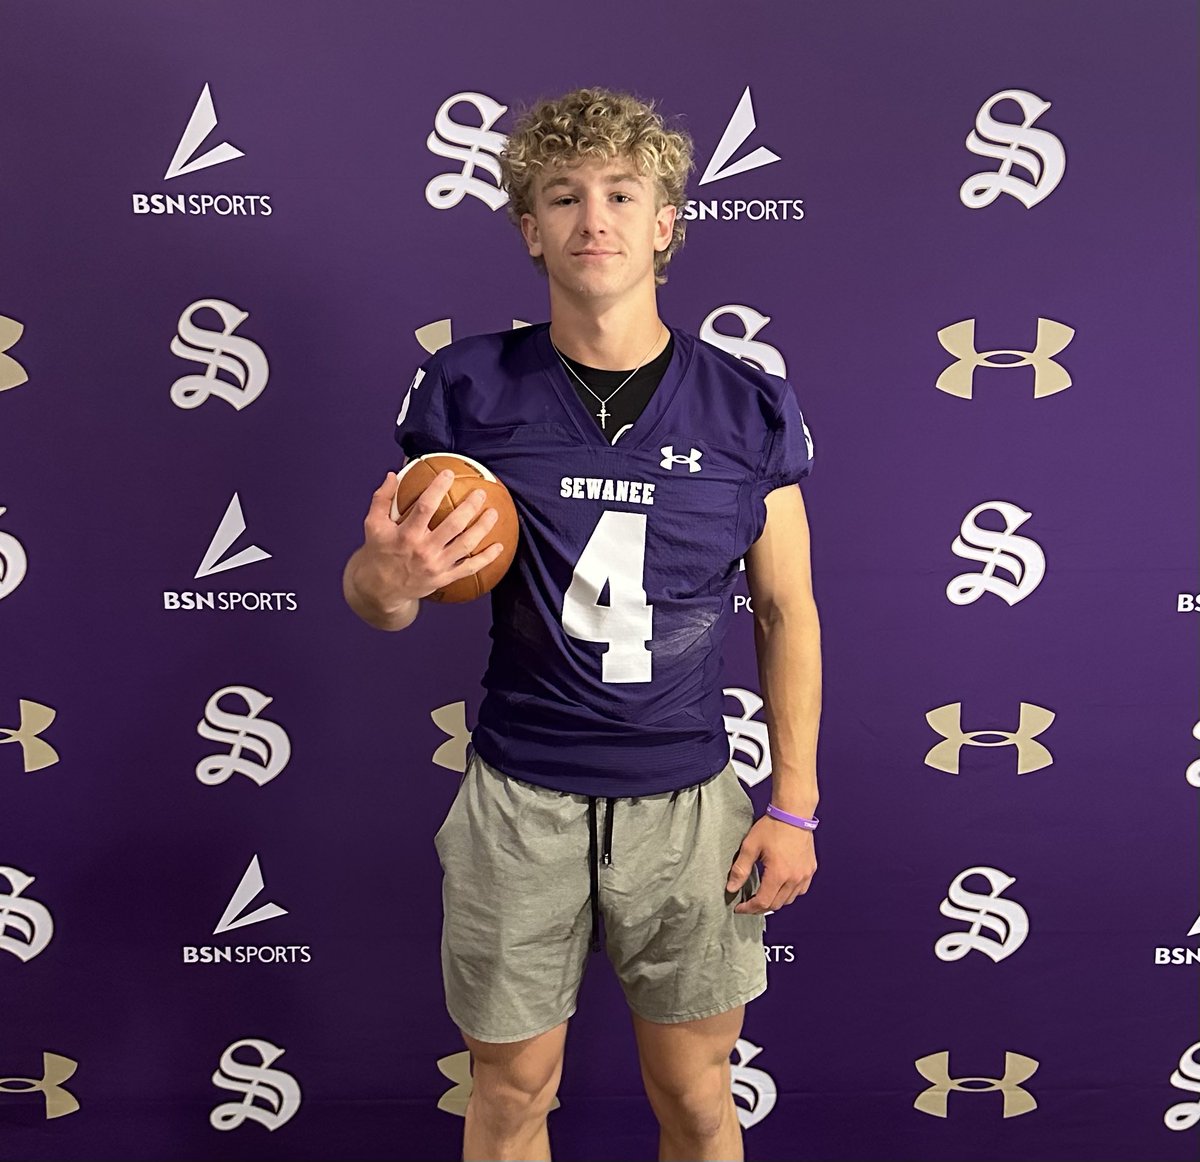 Had a great visit today @SewaneeFootball. Thanks to @CoachGC_Hobbs and @CoachMacSewanee for having me. @caprewett @CarlisleFunk @RonnieJankovich @roswellrecruits